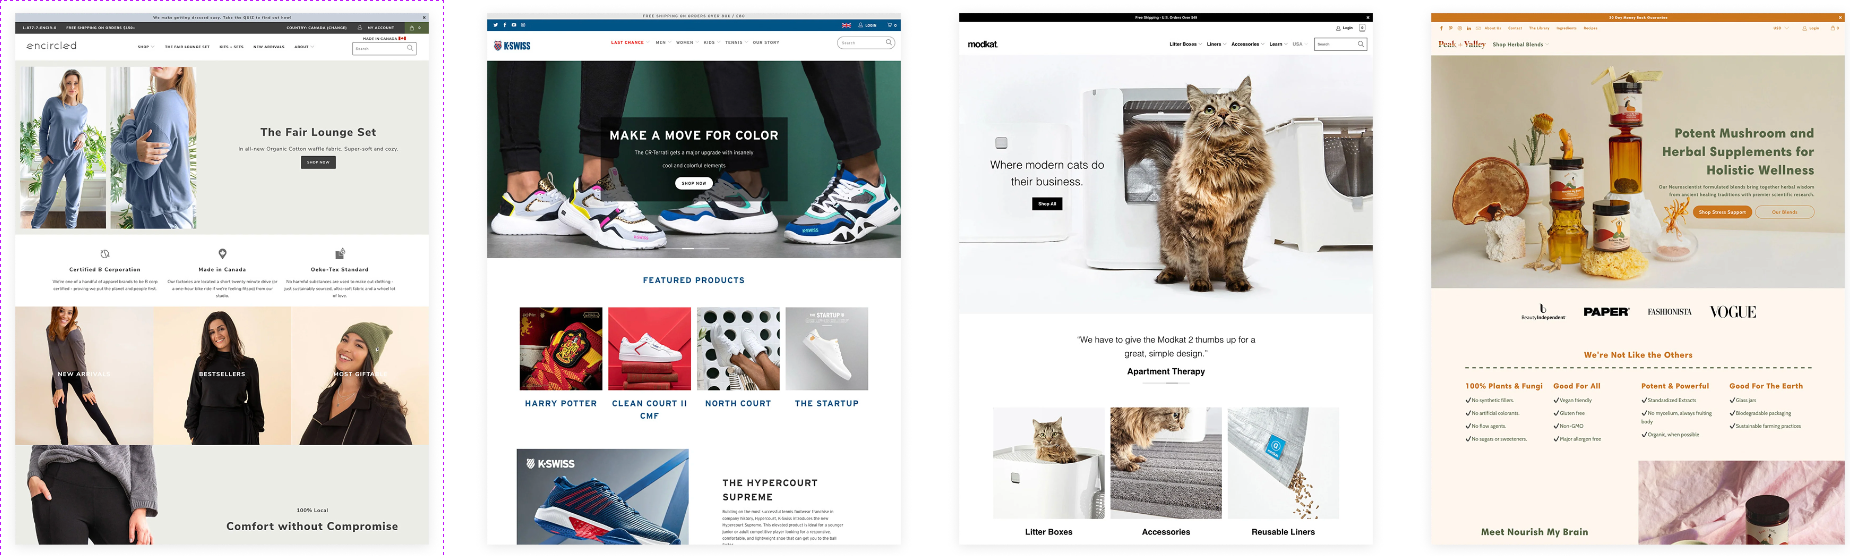 Shopify Themes represent the templates utilized by merchants in their eCommerce endeavors